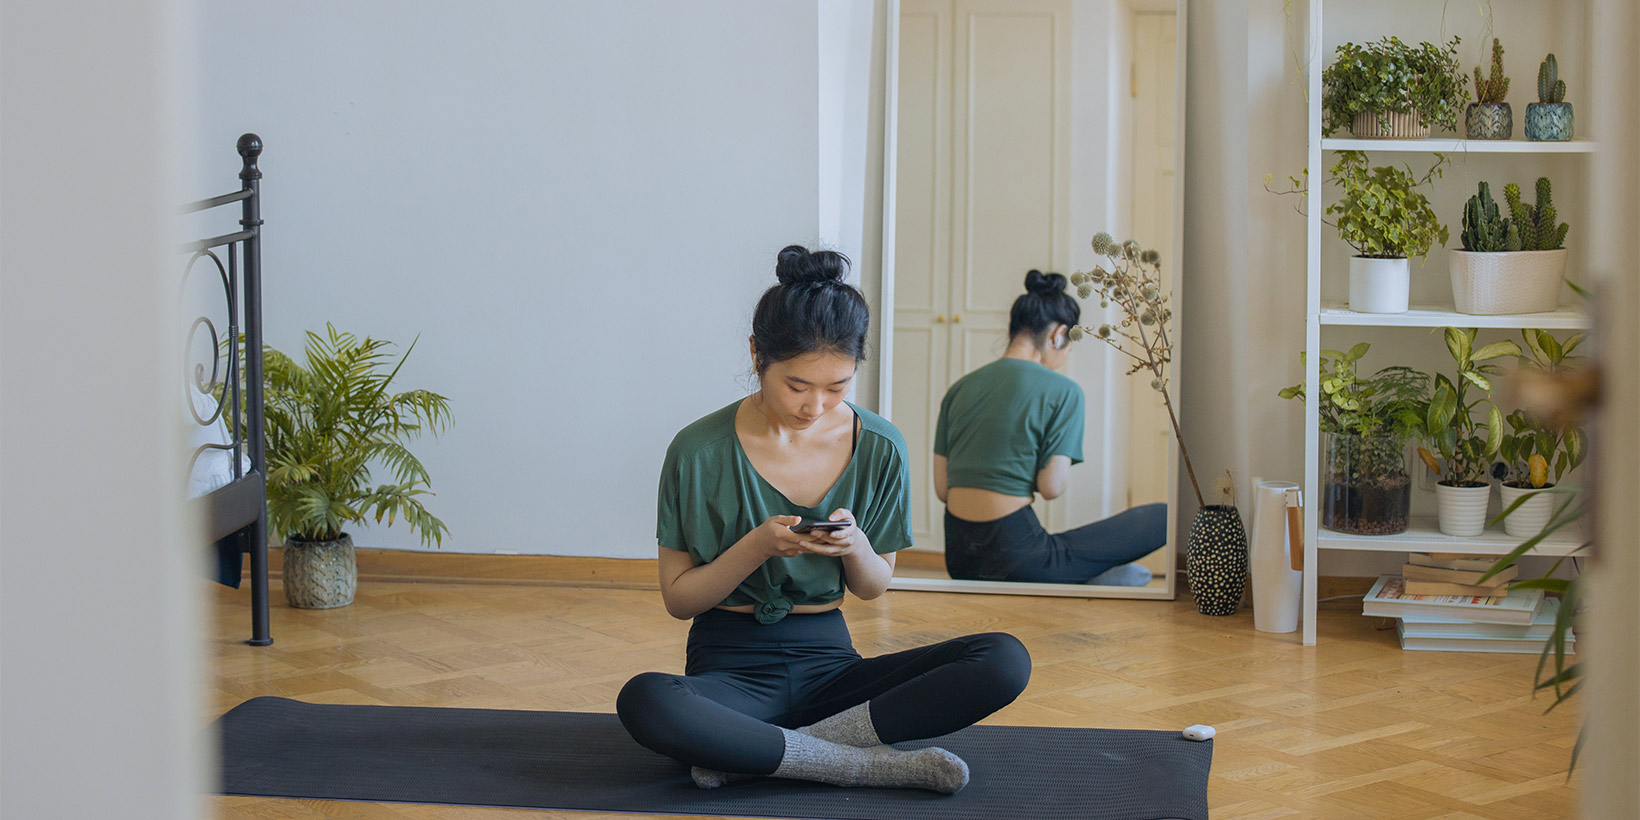 Text How to Successfully Teach Yoga To Teenagers